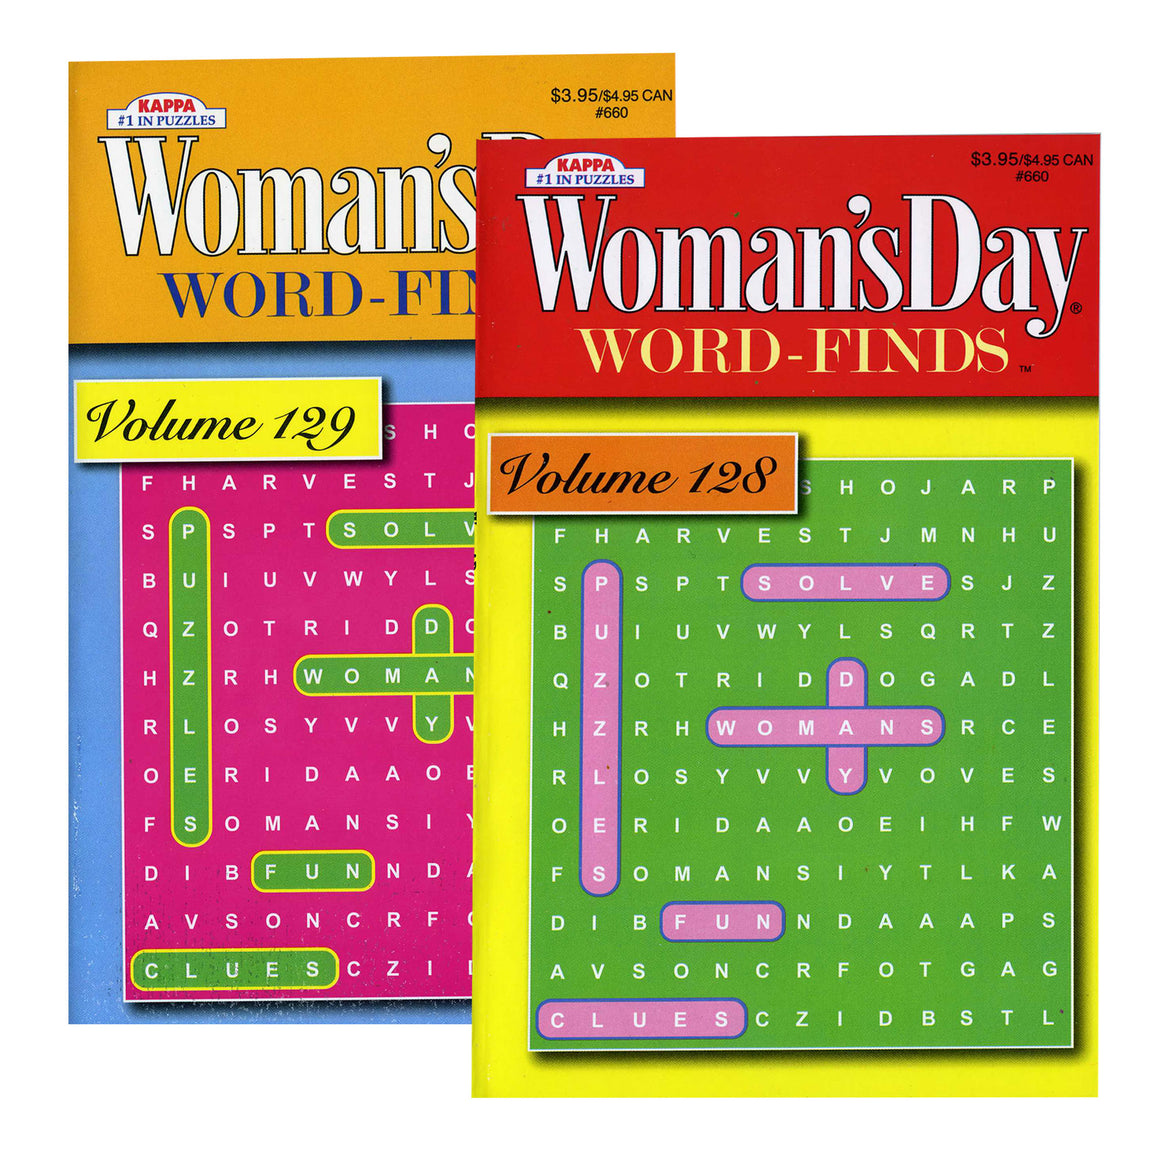 KAPPA Woman's Day Word Finds Puzzle Book-Digest Size